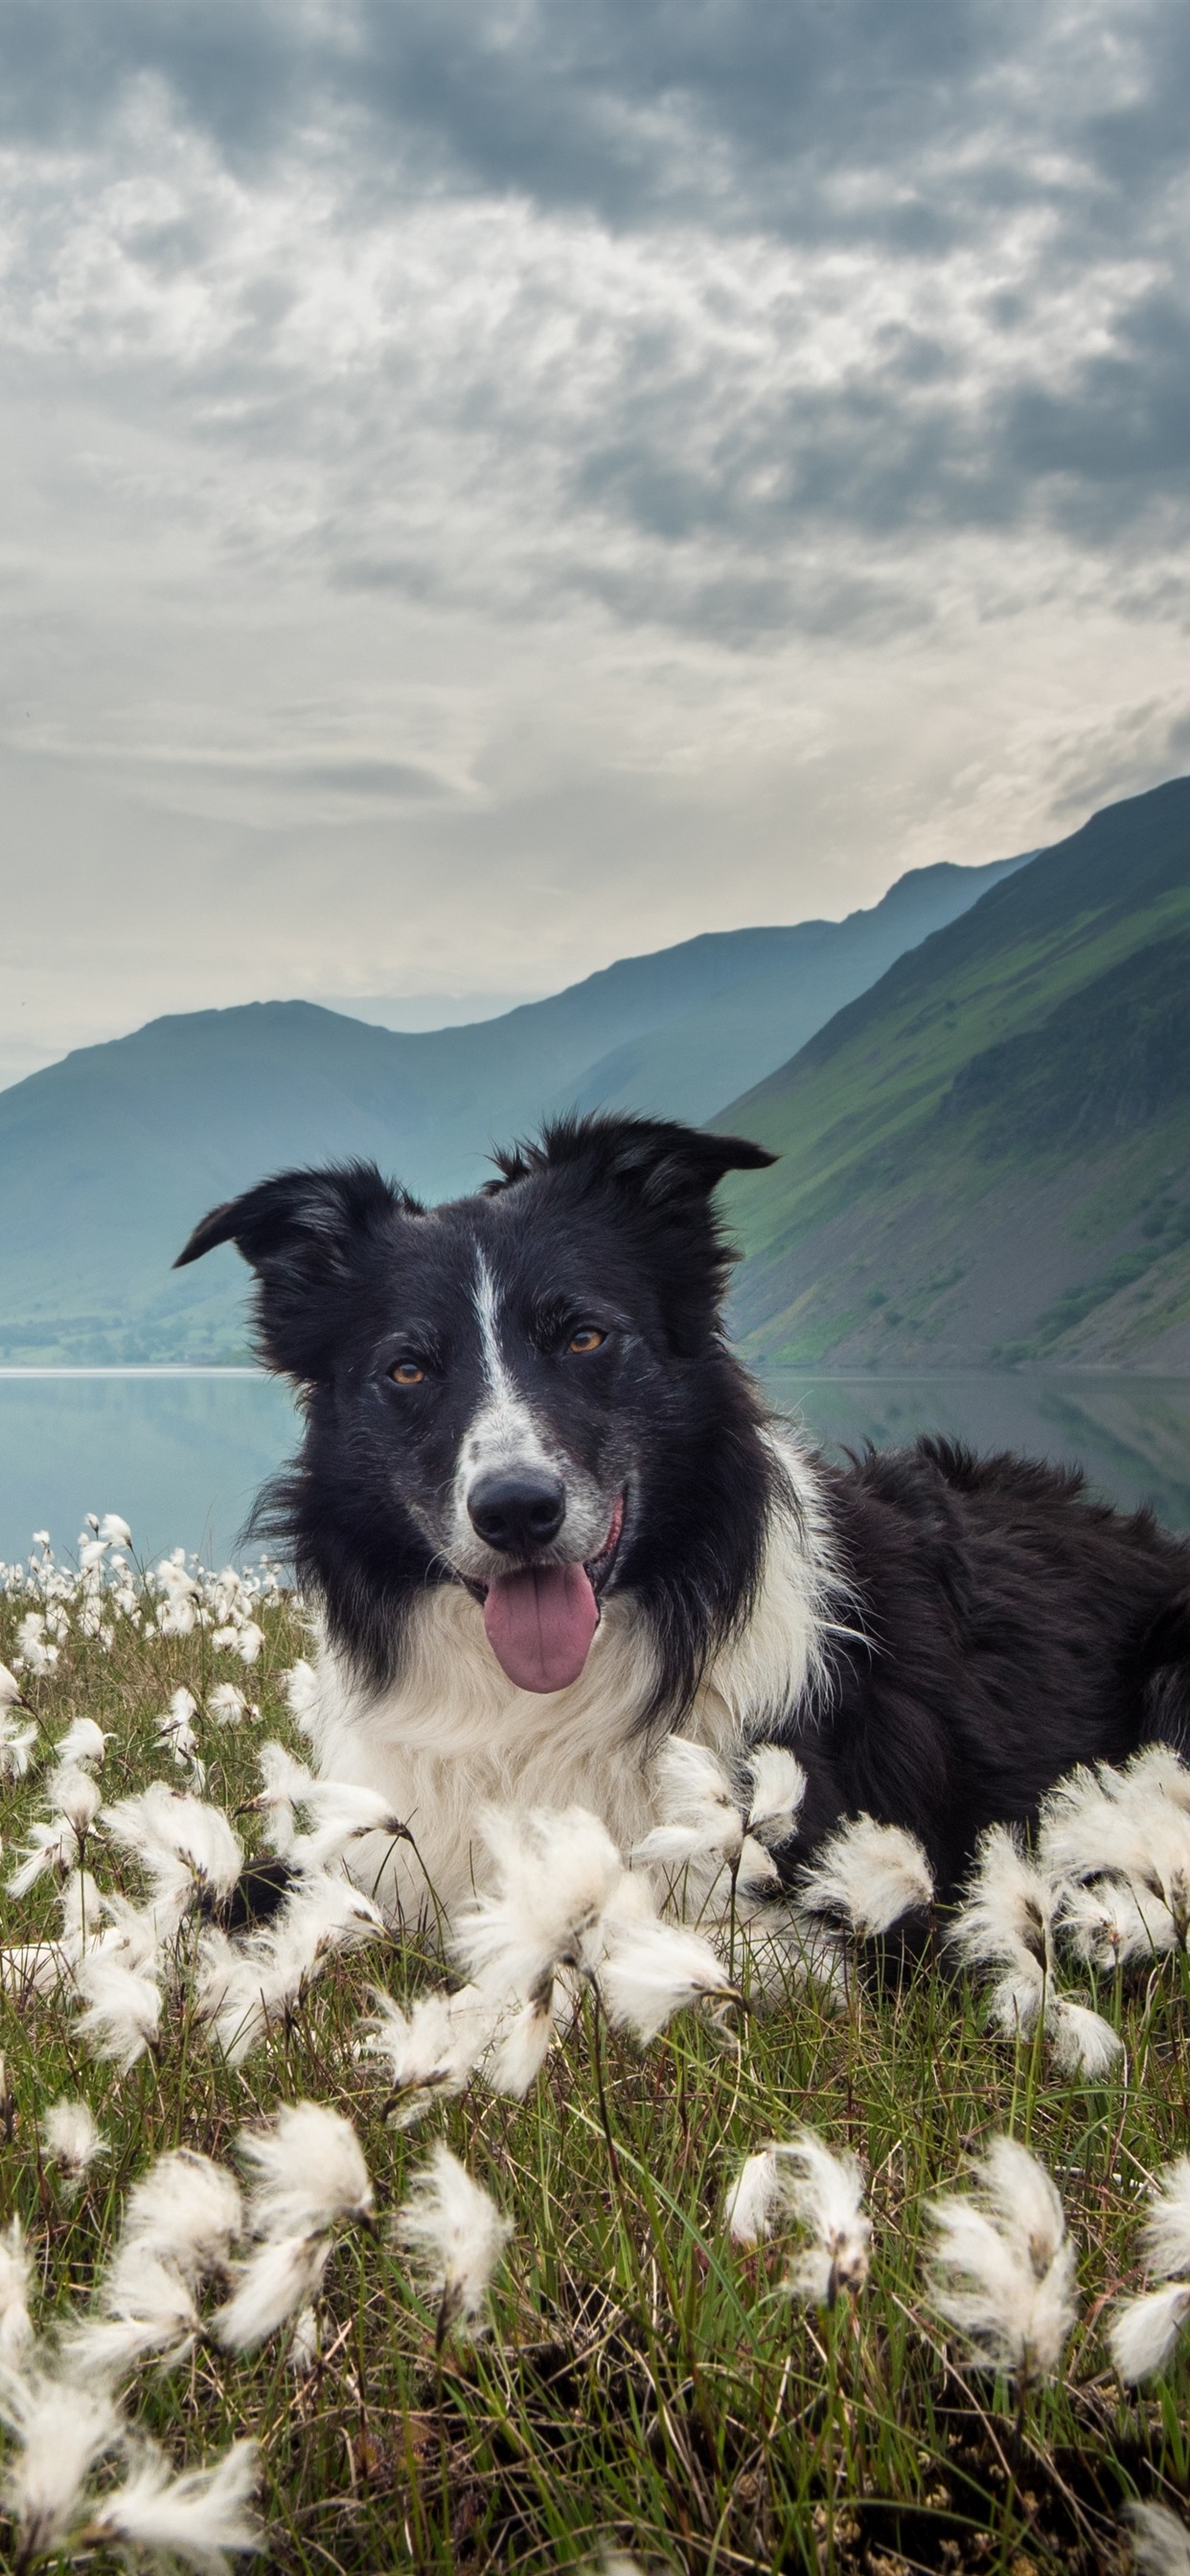 Iphone Wallpaper Border Collie, Dog, White Flowers, - Dogs On Mountains - HD Wallpaper 